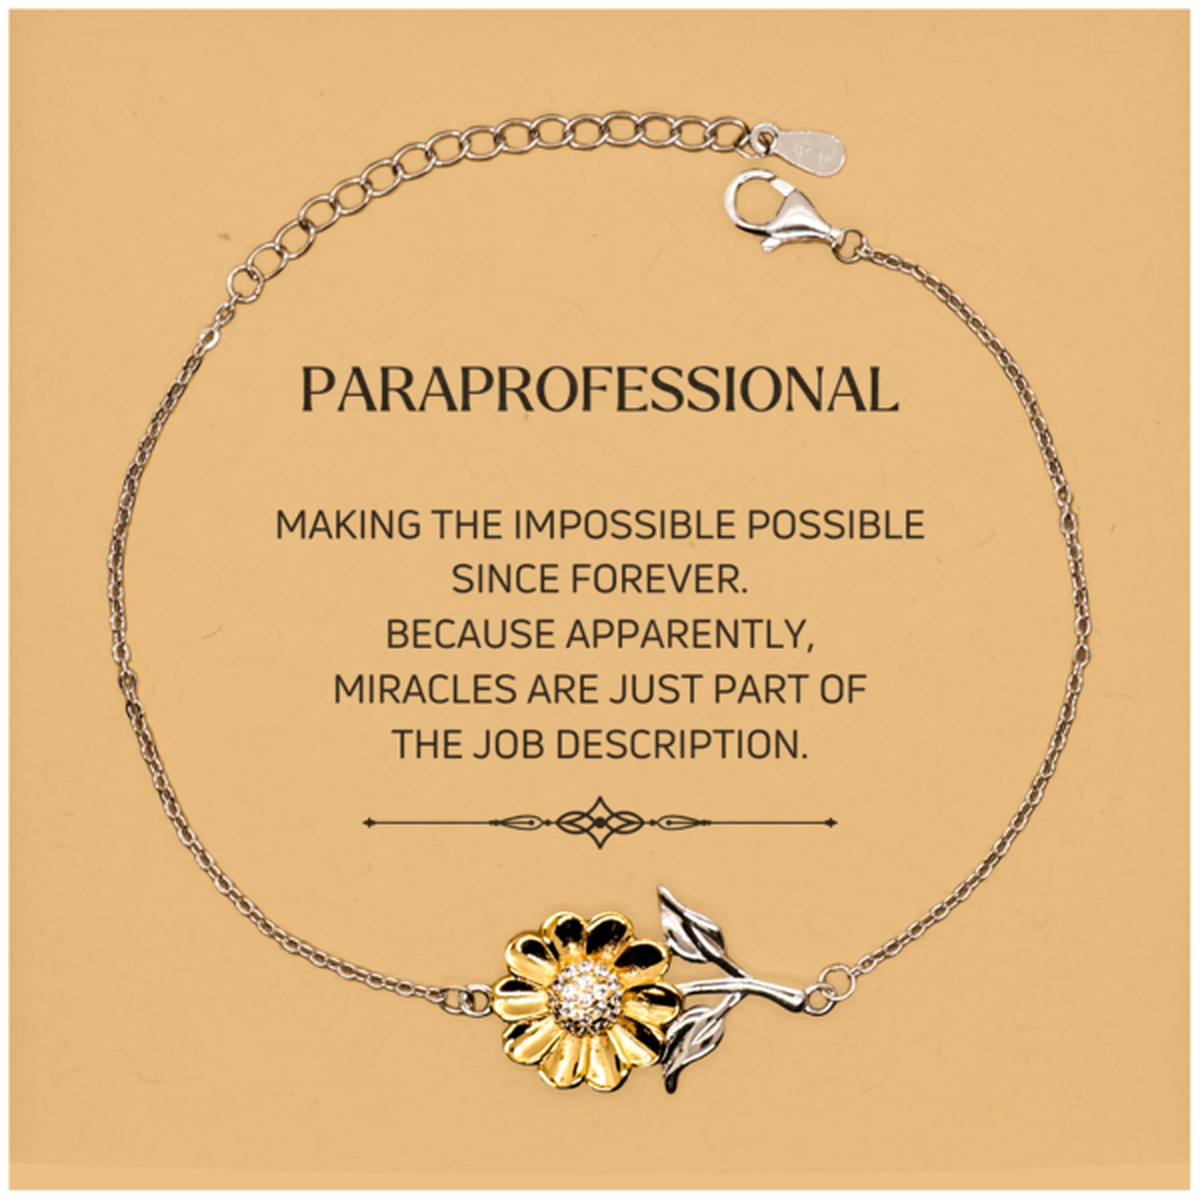 Funny Paraprofessional Gifts, Miracles are just part of the job description, Inspirational Birthday Christmas Sunflower Bracelet For Paraprofessional, Men, Women, Coworkers, Friends, Boss